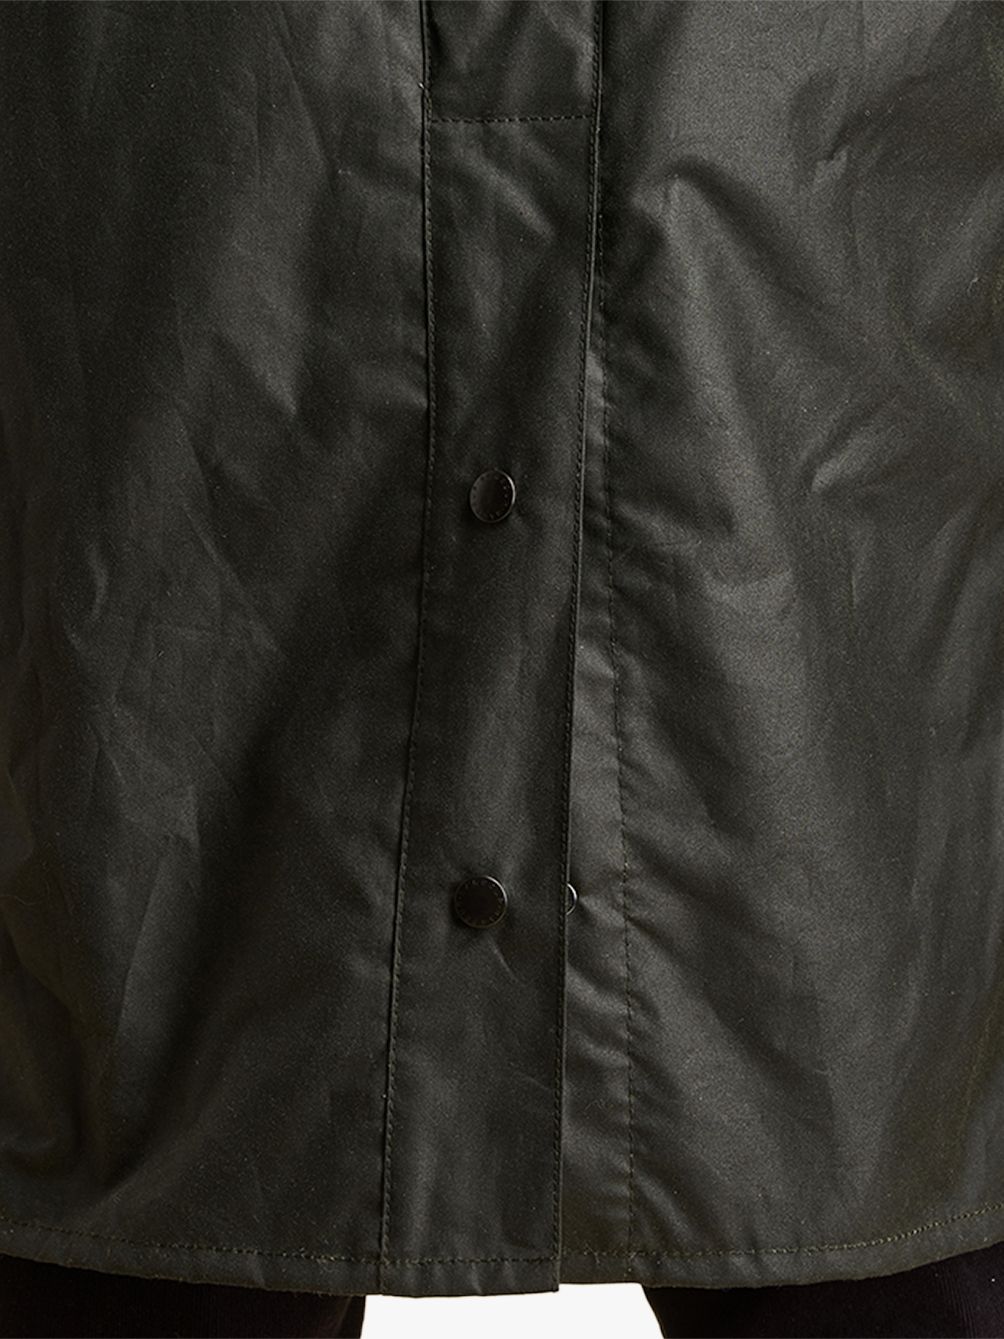 barbour mens burghley waxed coat